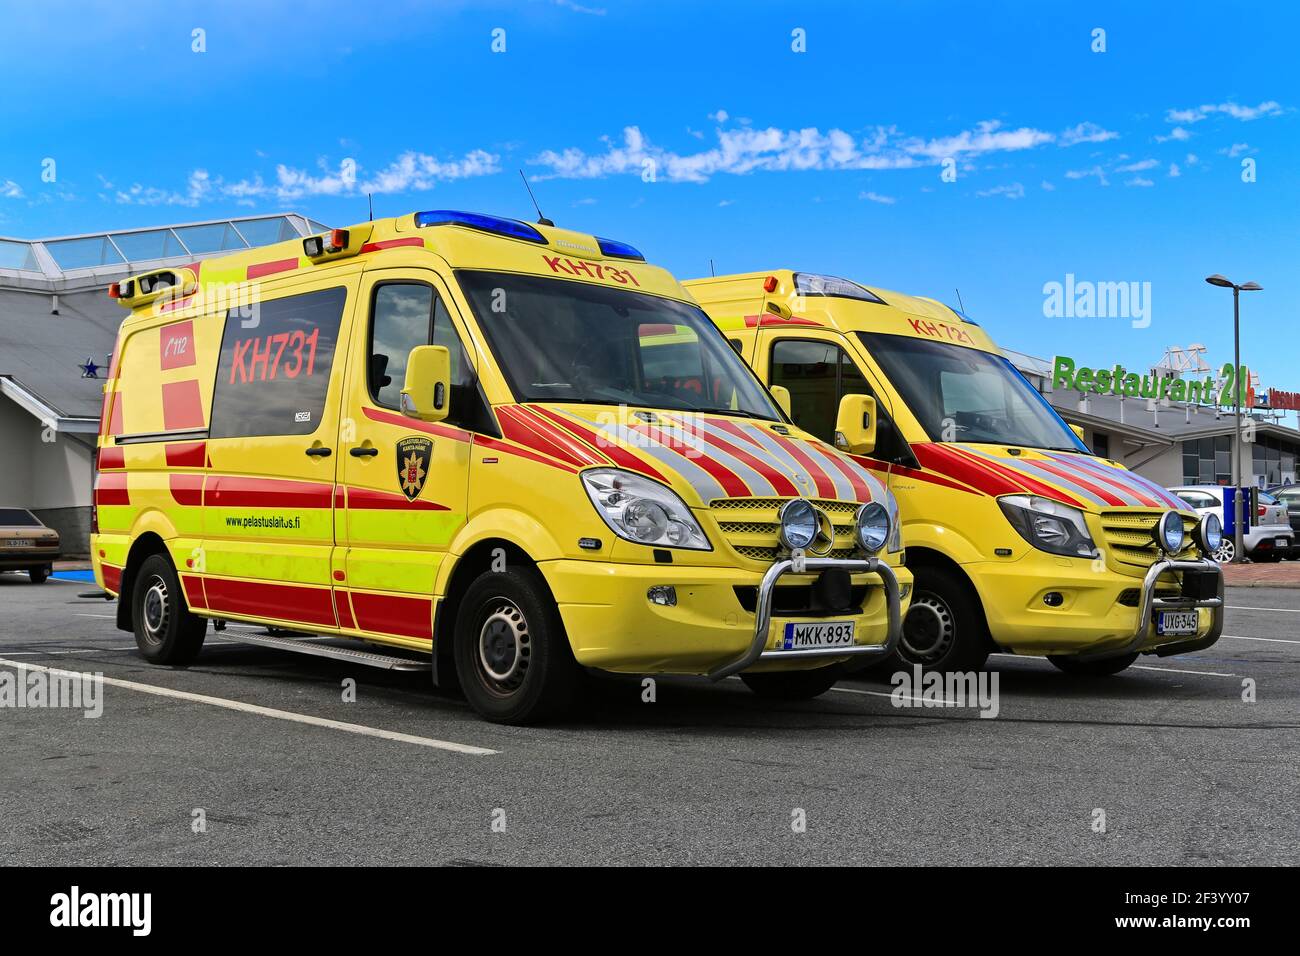 Two ambulance vehicles parked outside a service station. Finland. Stock Photo